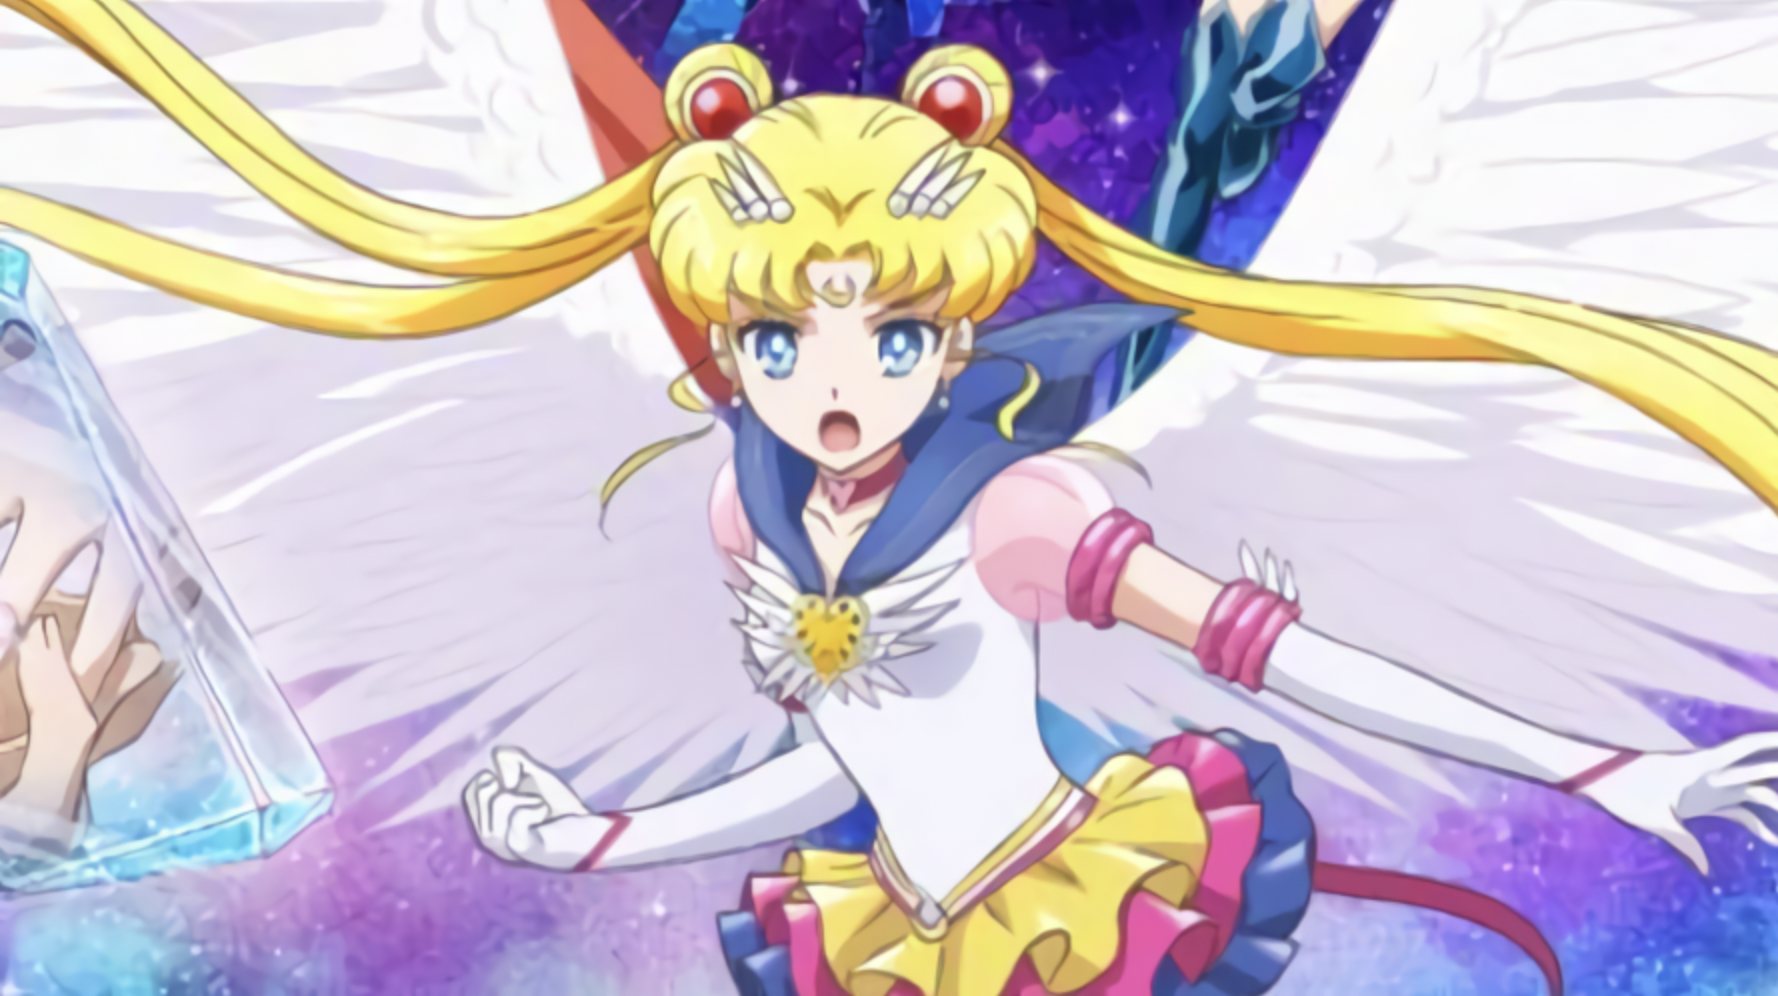 Trailer for Pretty Guardian Sailor Moon Cosmos Part 2 Released